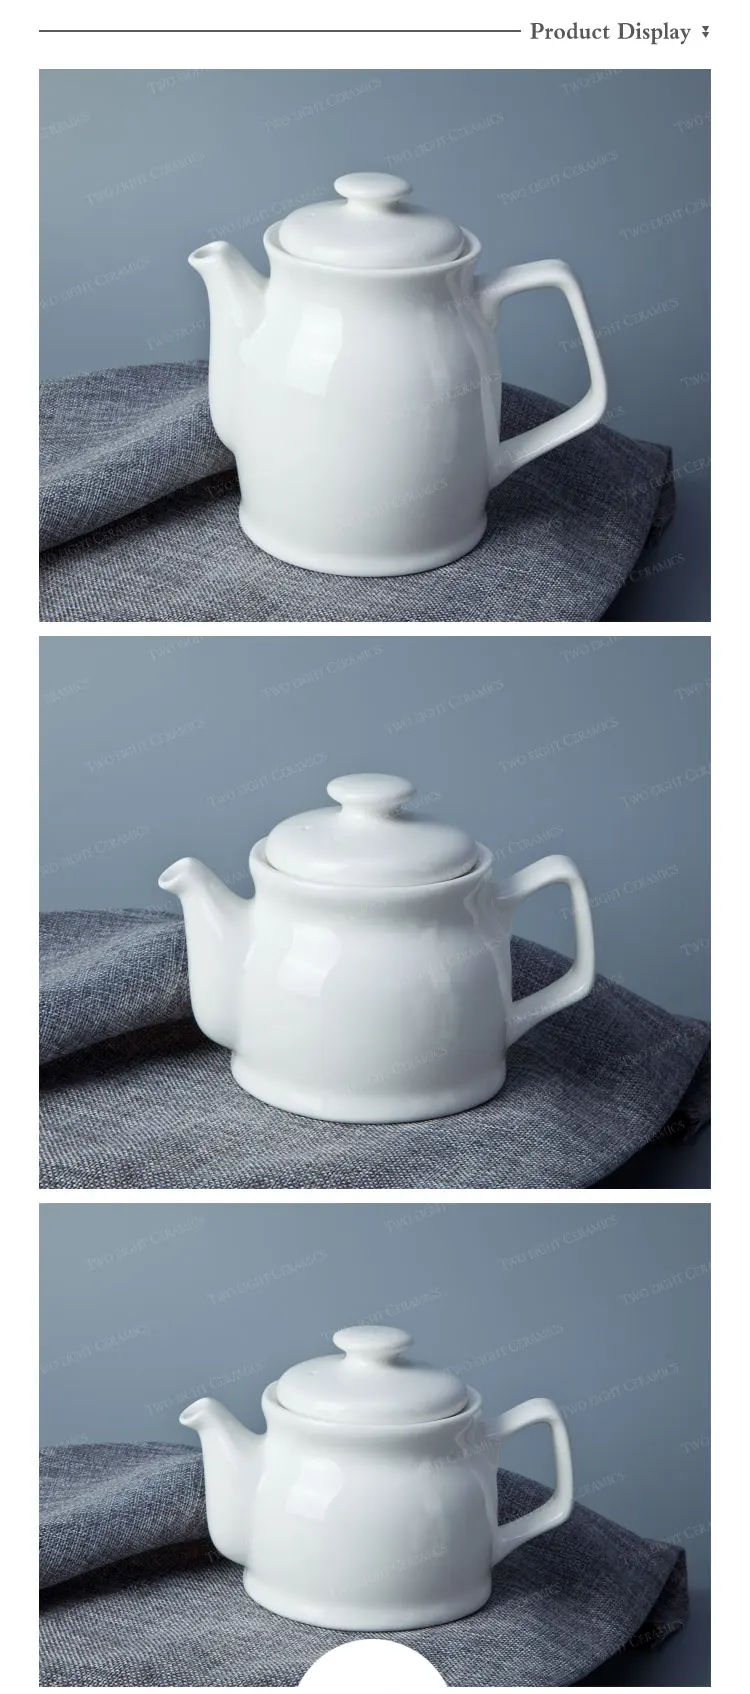 Catering banquet wedding for sale Chinese style plain white porcelain teapot